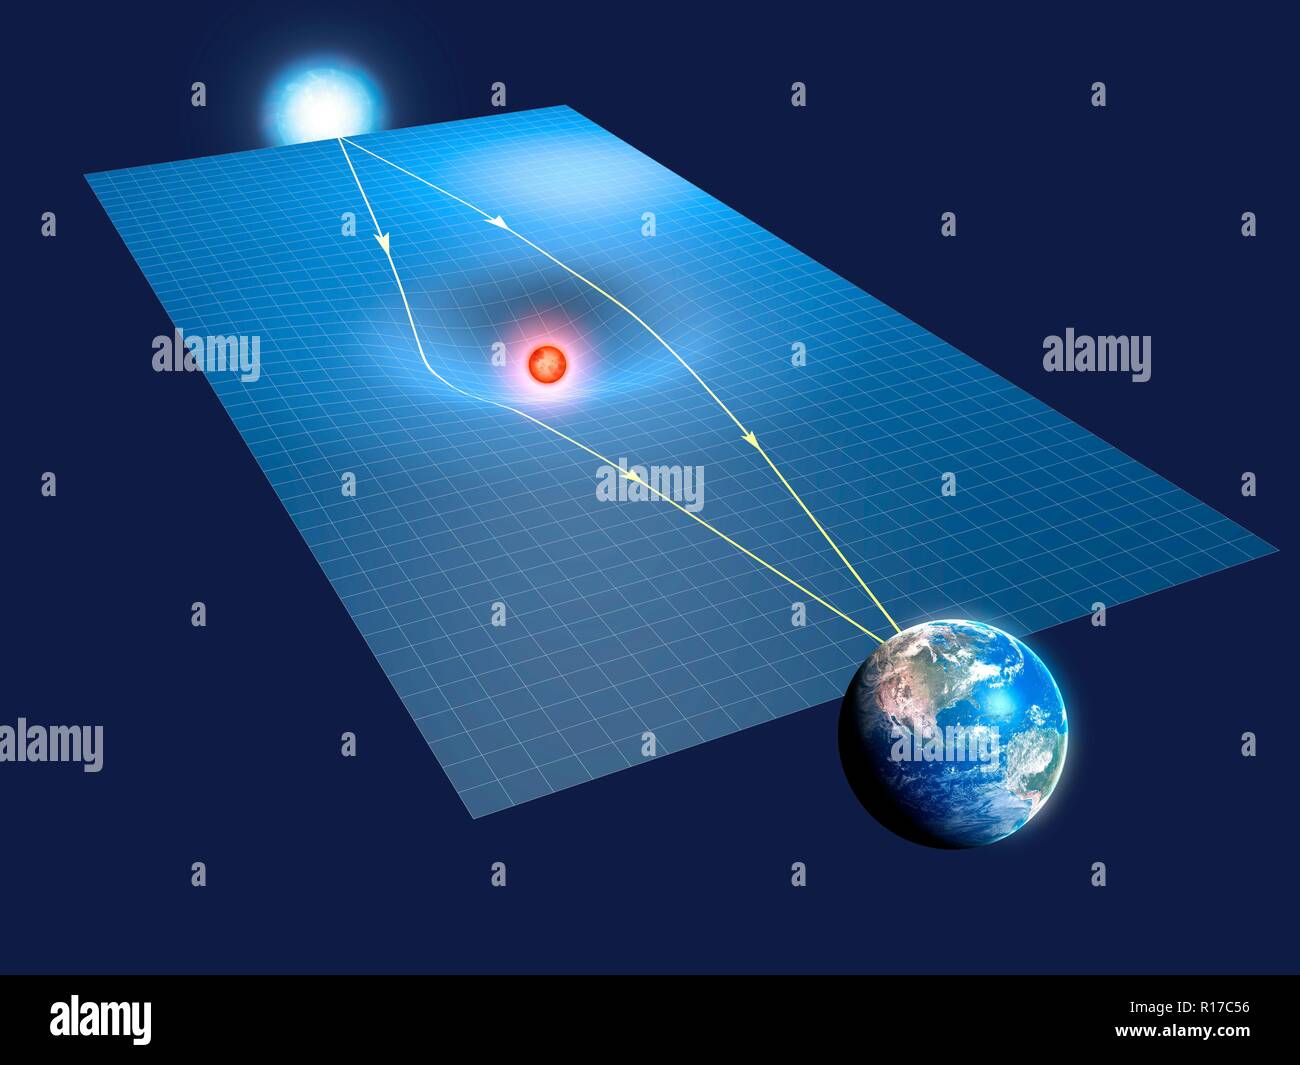 Gravitational Lensing Illustration Showing How Gravitational Lensing Can Be Used To View Otherwise Unobservable Objects In This Case A Blue Star To Stock Photo Alamy